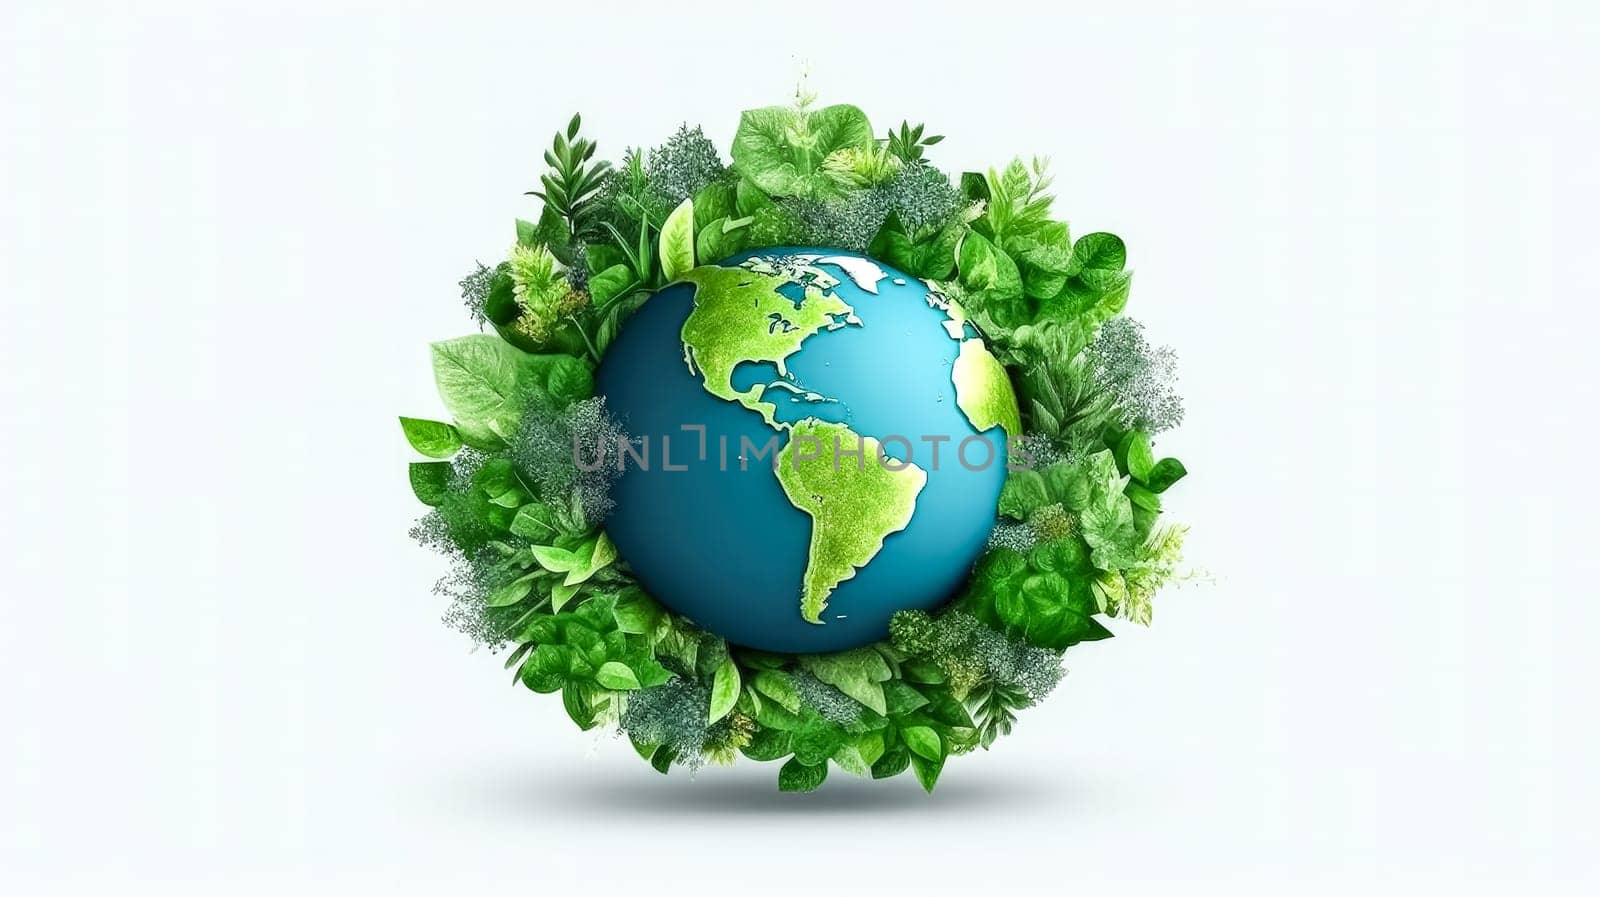 Green mosaic planet, Earth adorned with trees and grass, a vibrant illustration of nature thriving a joyous scene for Earth Day festivities